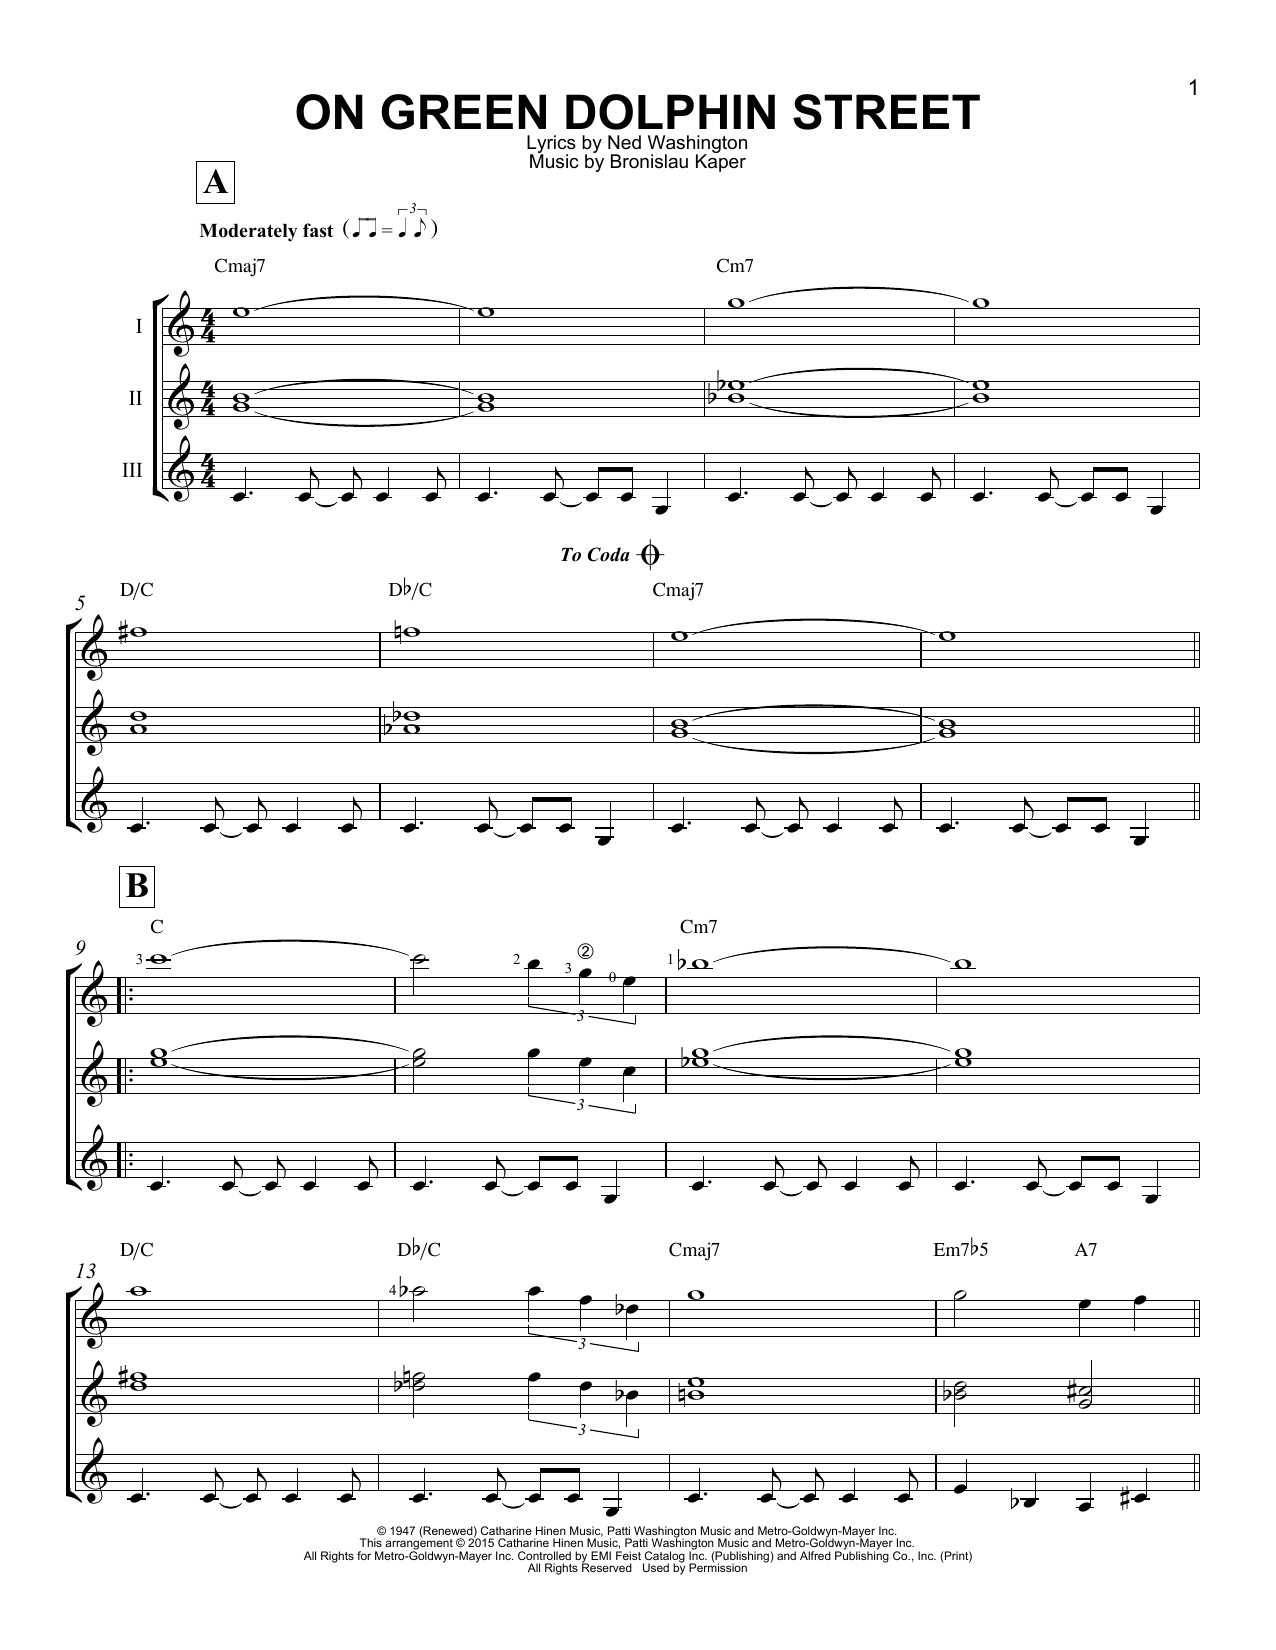 Ned Washington On Green Dolphin Street sheet music notes and chords. Download Printable PDF.